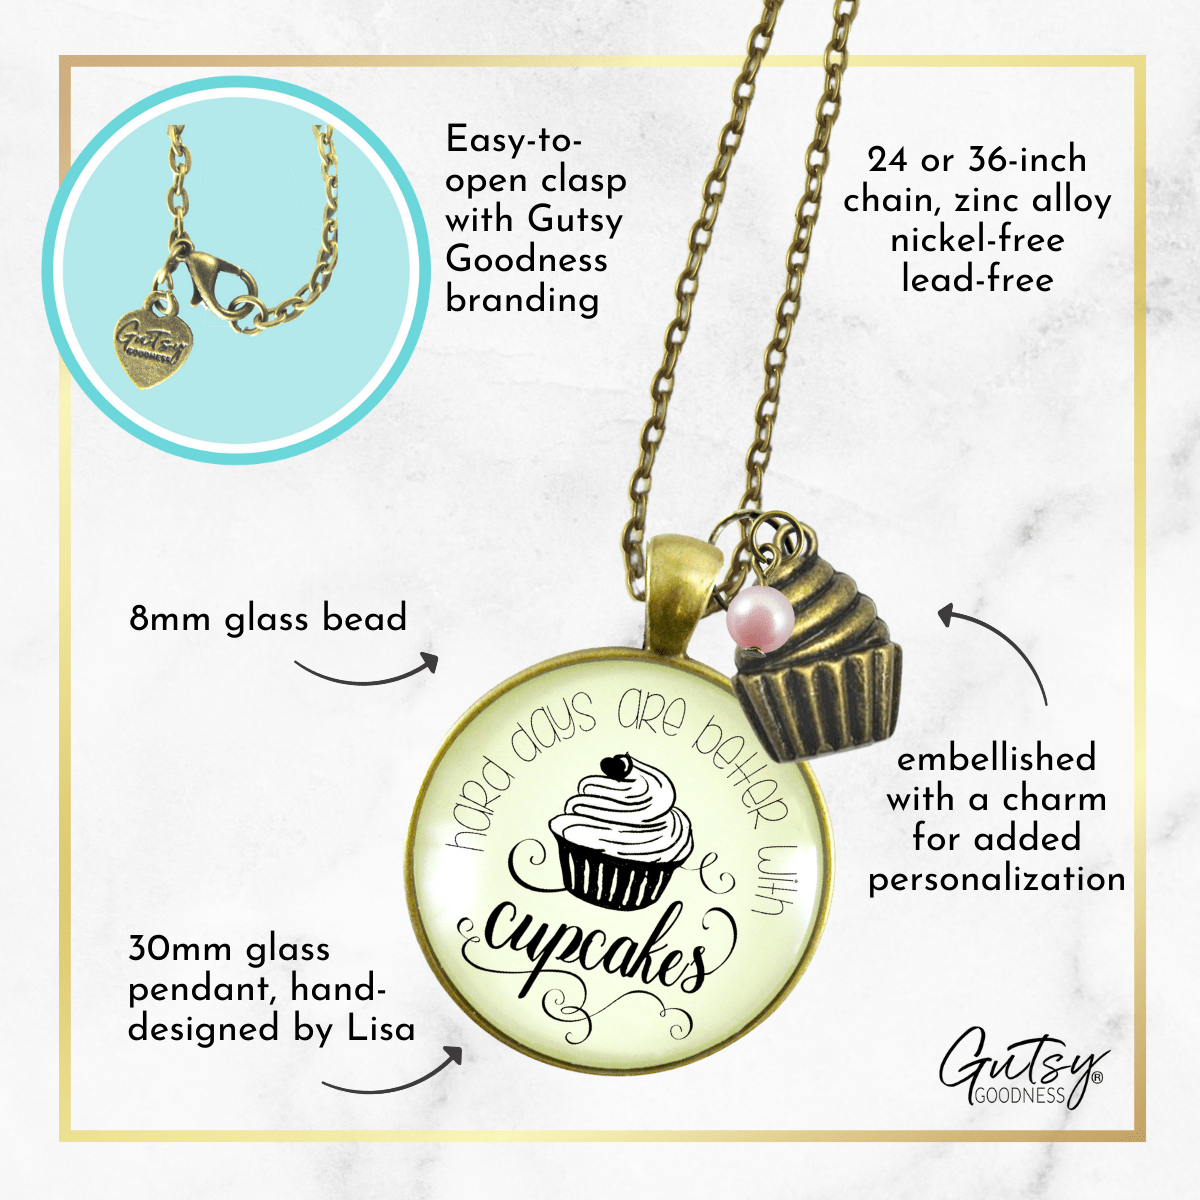 Gutsy Goodness Cupcake Necklace Hard Days Better Bakers Gift Jewelry Dessert Charm - Gutsy Goodness;Cupcake Necklace Hard Days Better Bakers Gift Jewelry Dessert Charm - Gutsy Goodness Handmade Jewelry Gifts